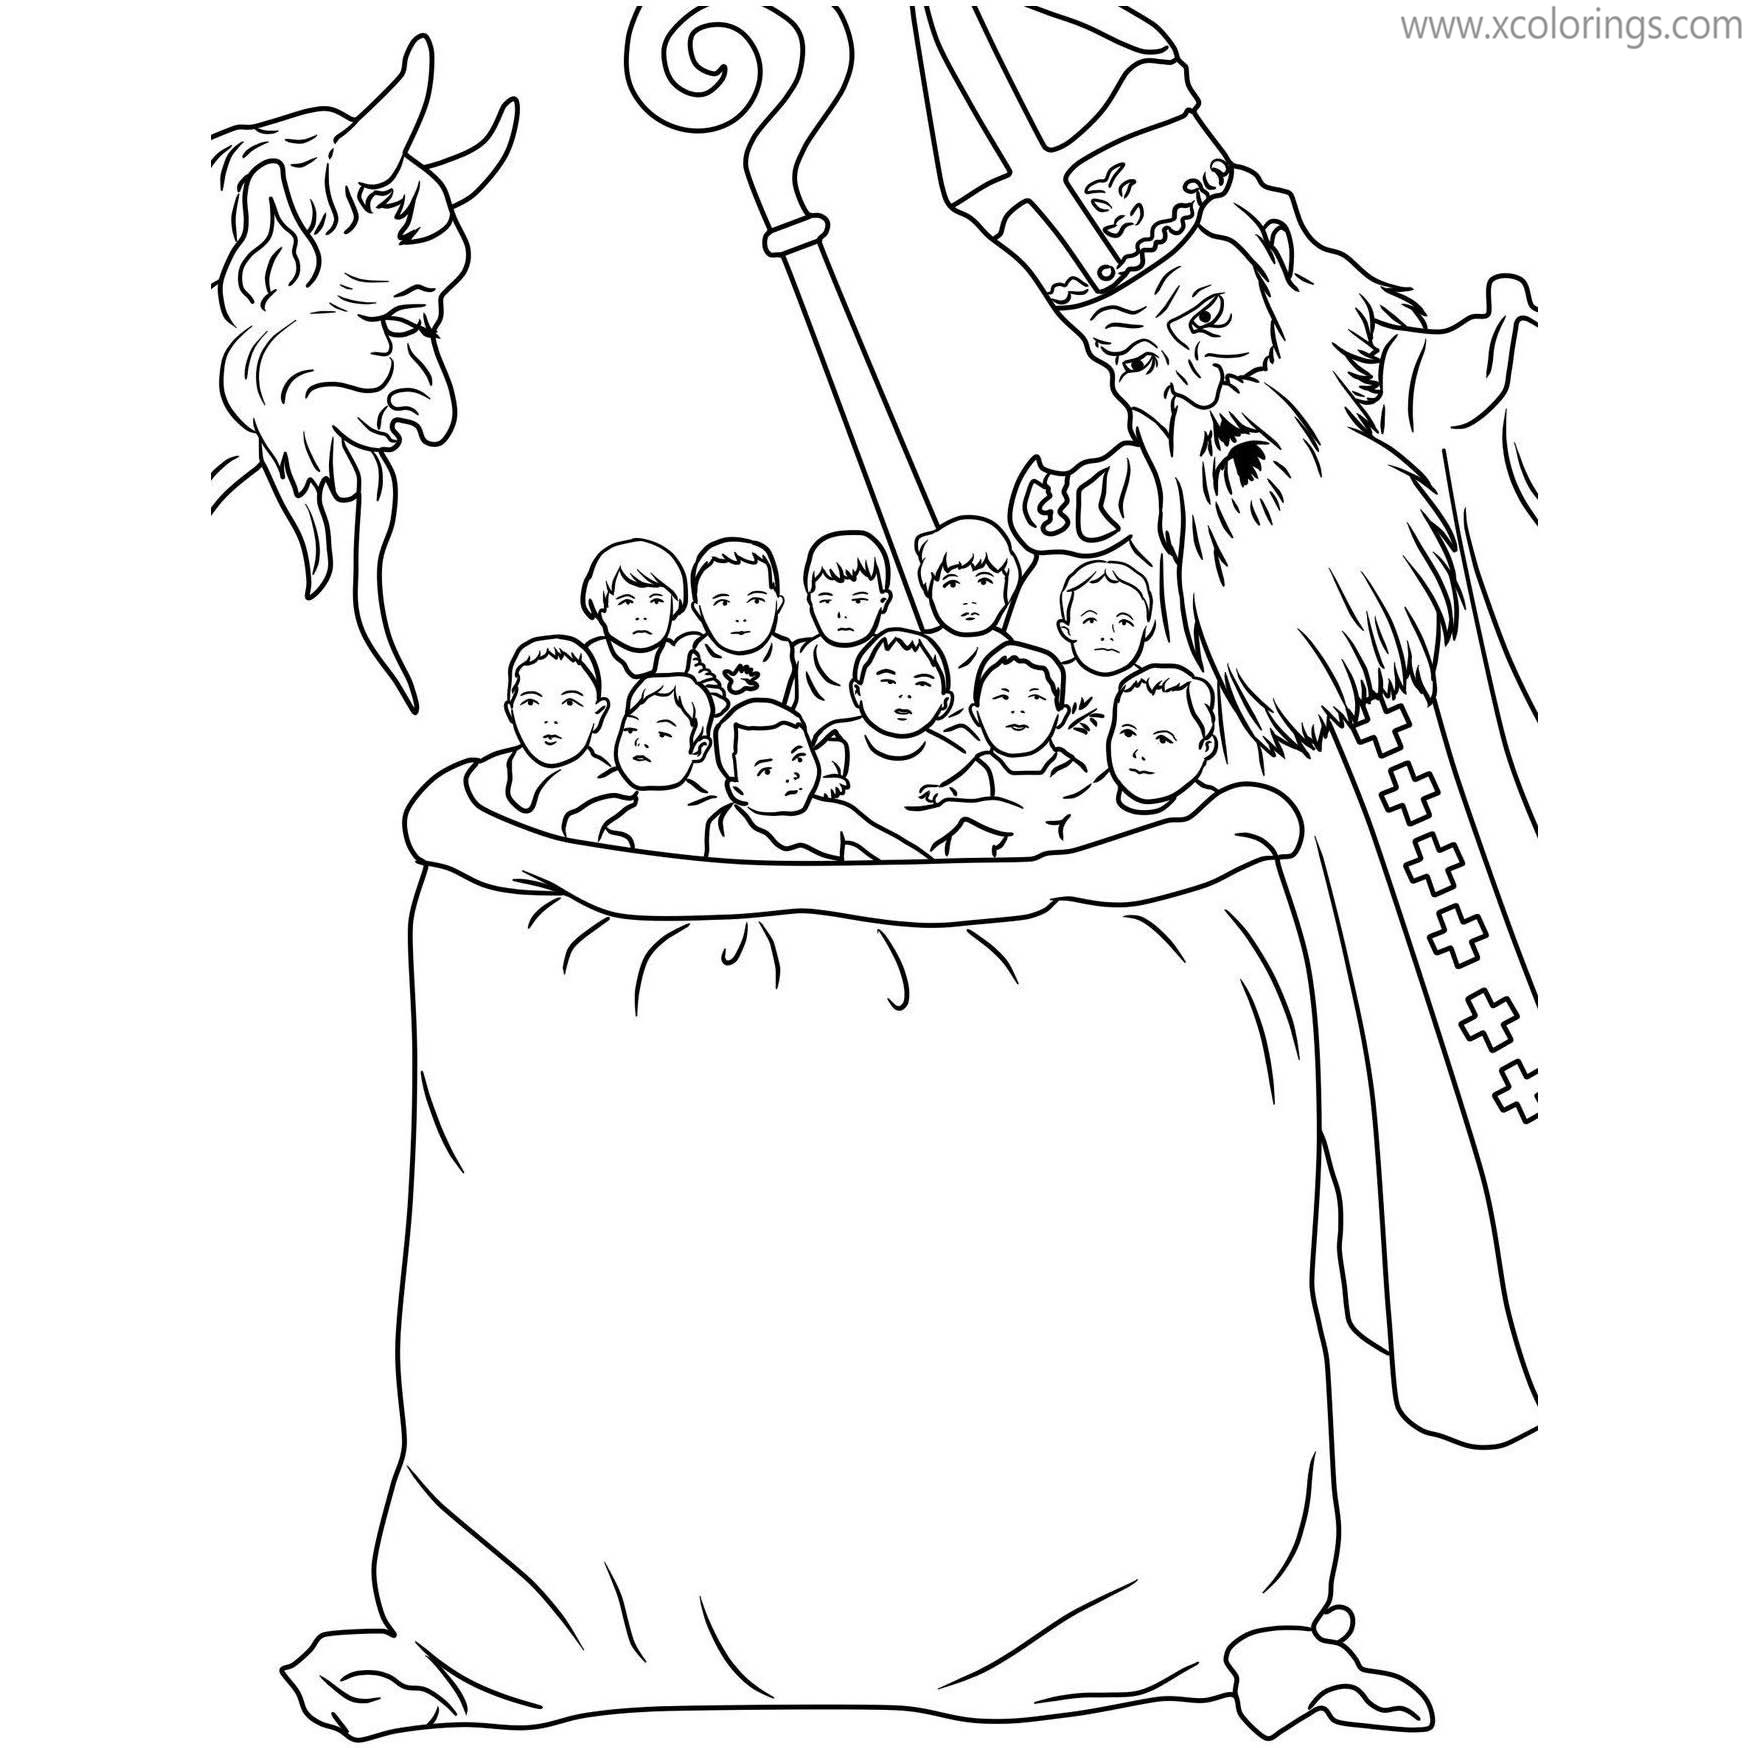 Free Krampus and Children Coloring Pages printable